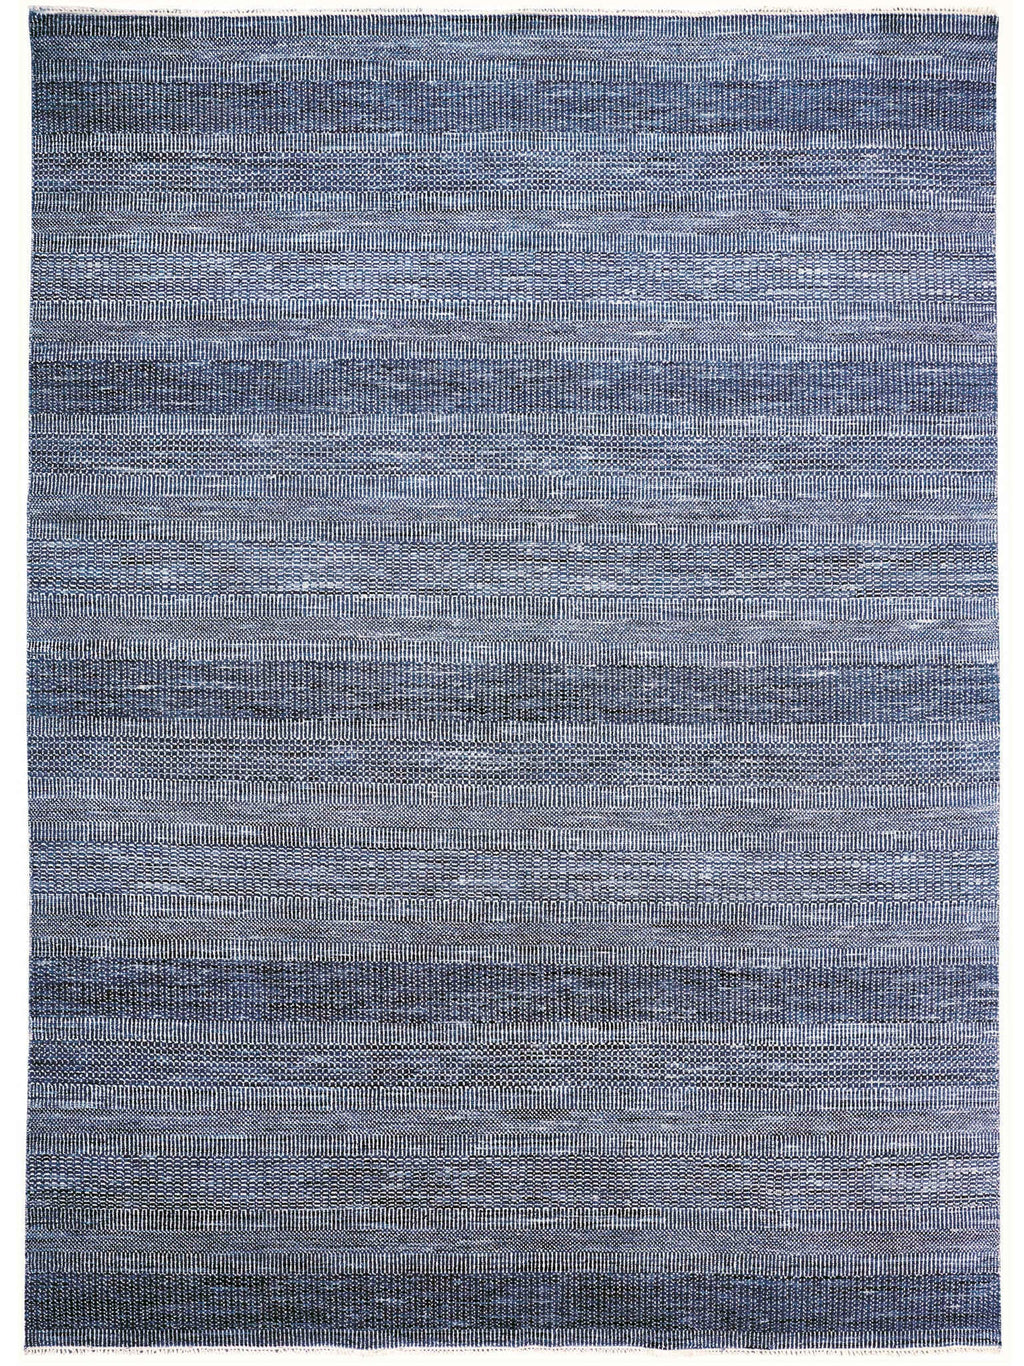 JANSON Collection Wool & Viscose Rug in Navy Silver